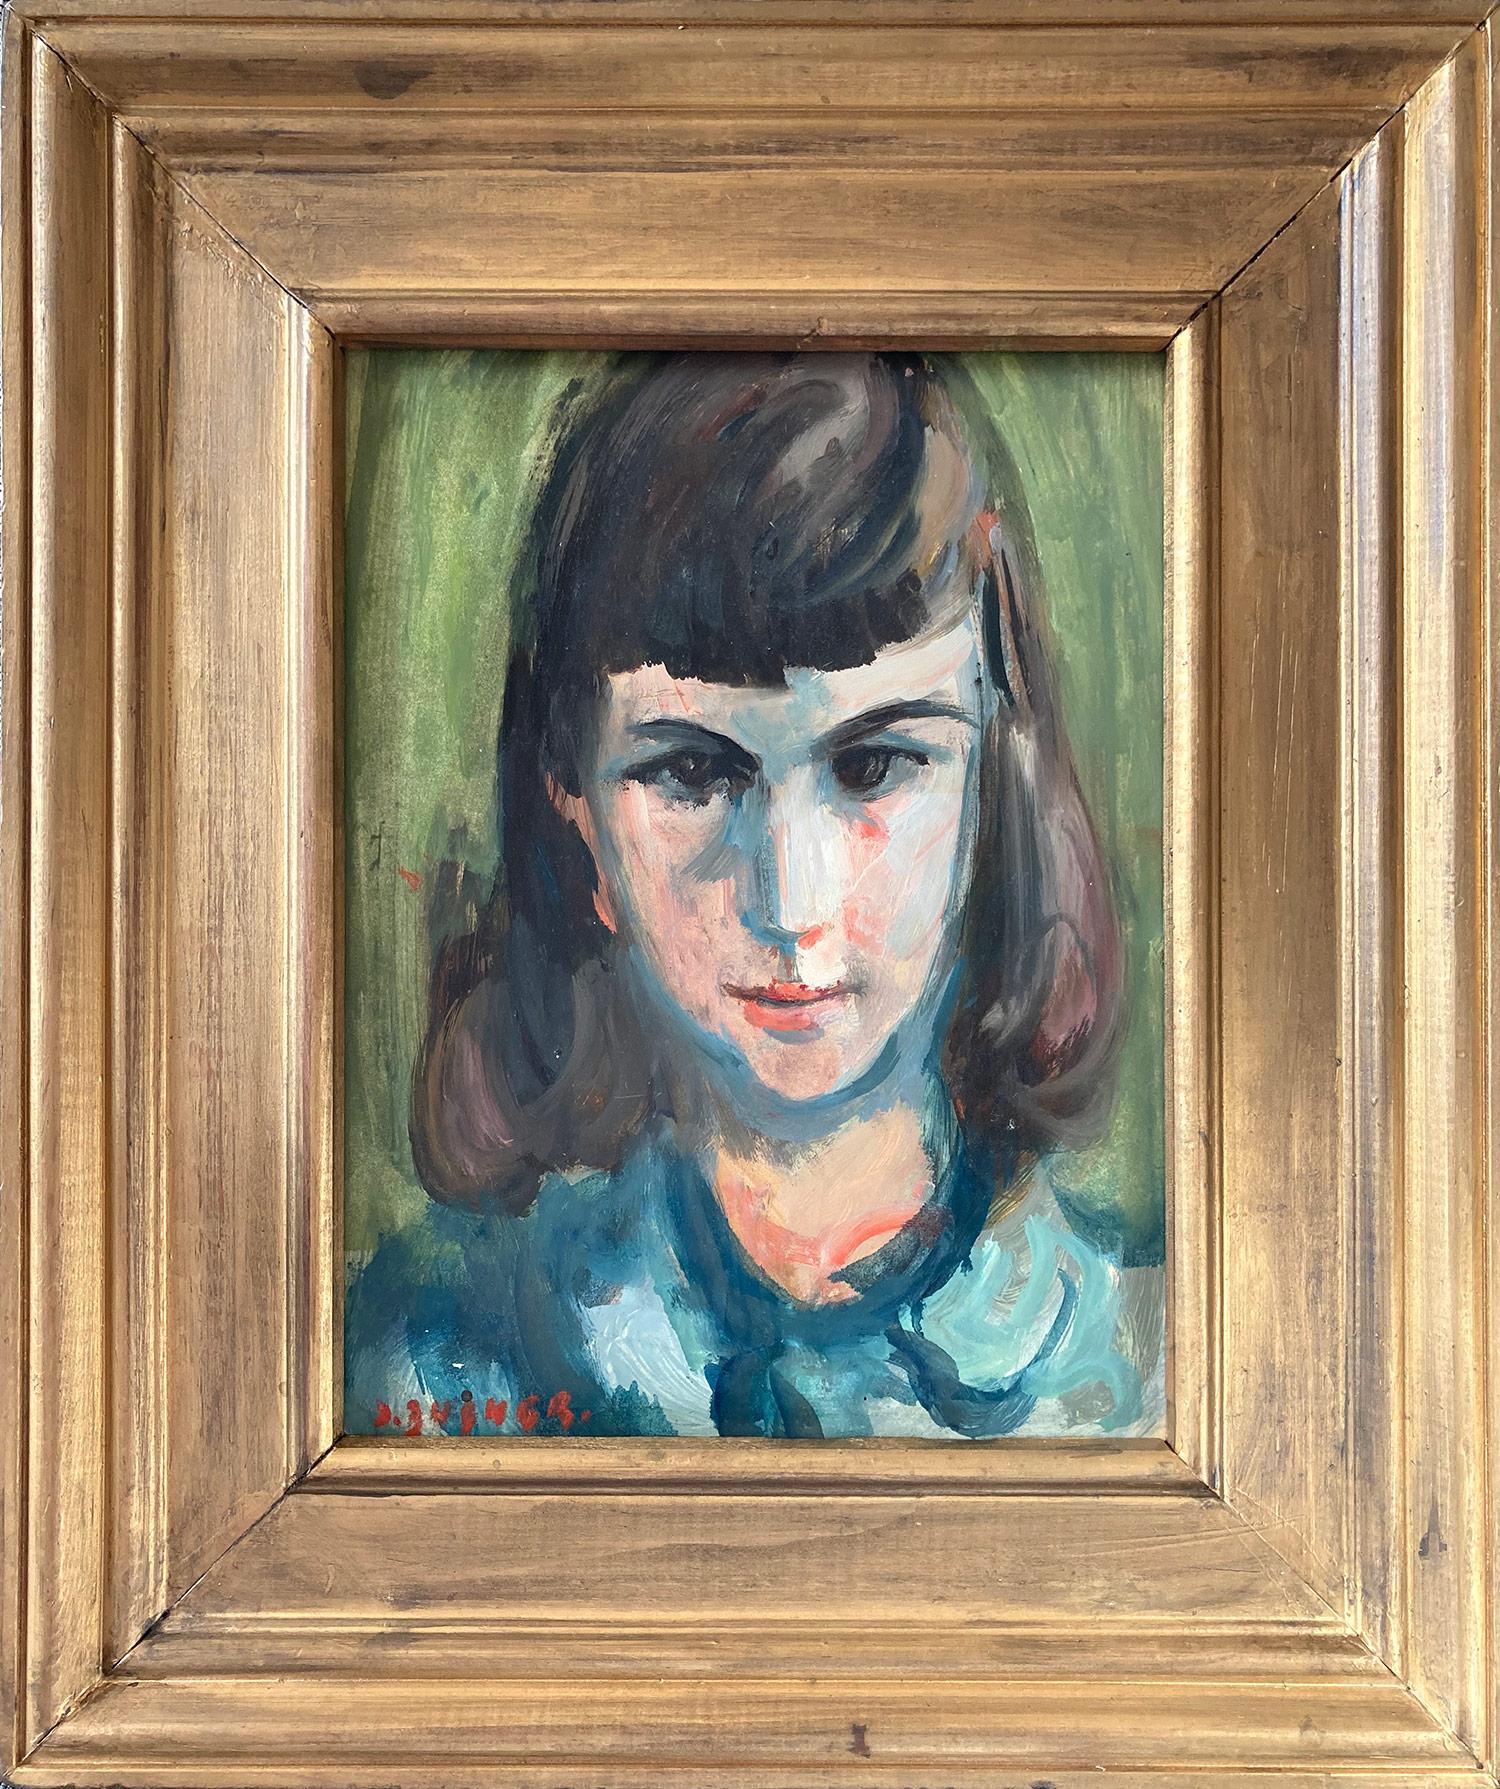 Jacques Zucker Portrait Painting - "Portrait of Young Girl with Blue Shirt" Post-Impressionist French Oil Painting